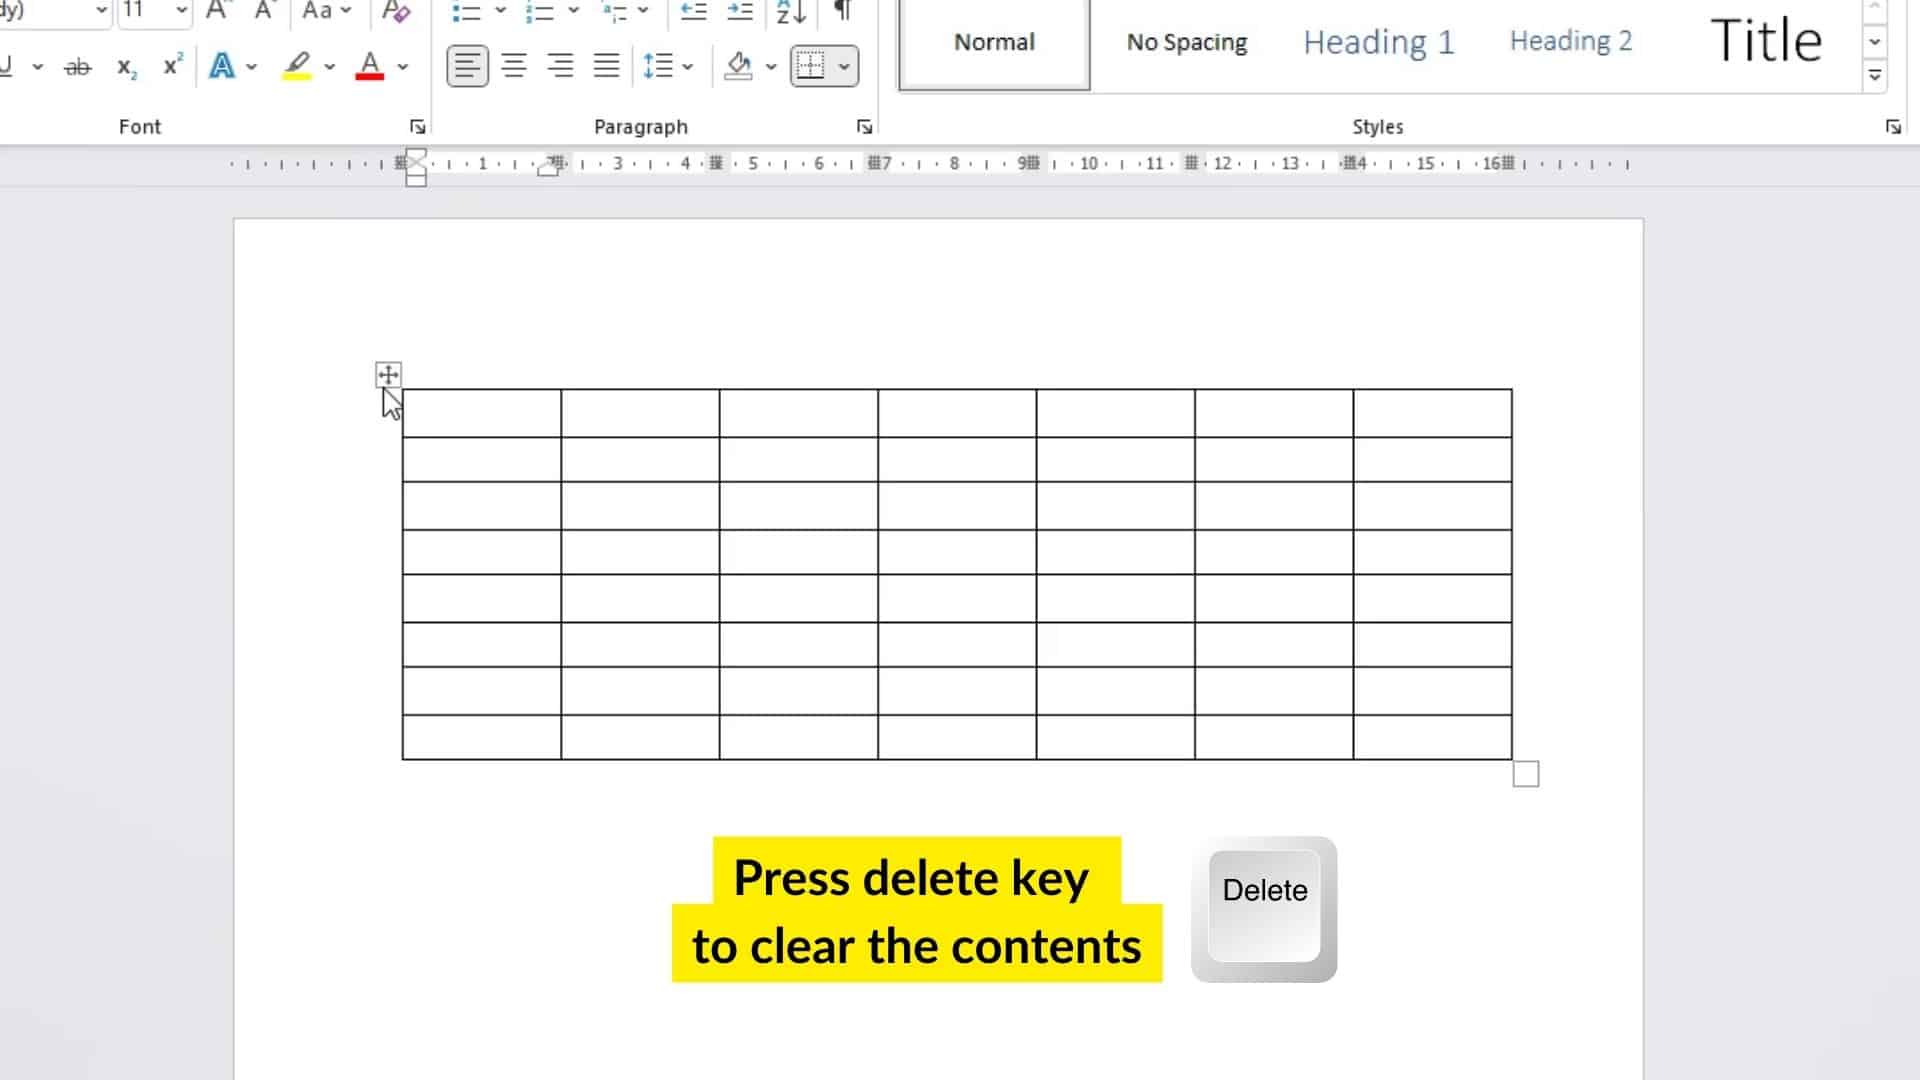 How to Delete Text in A MS Word Table (Clear Contents without Deleting Table) 4